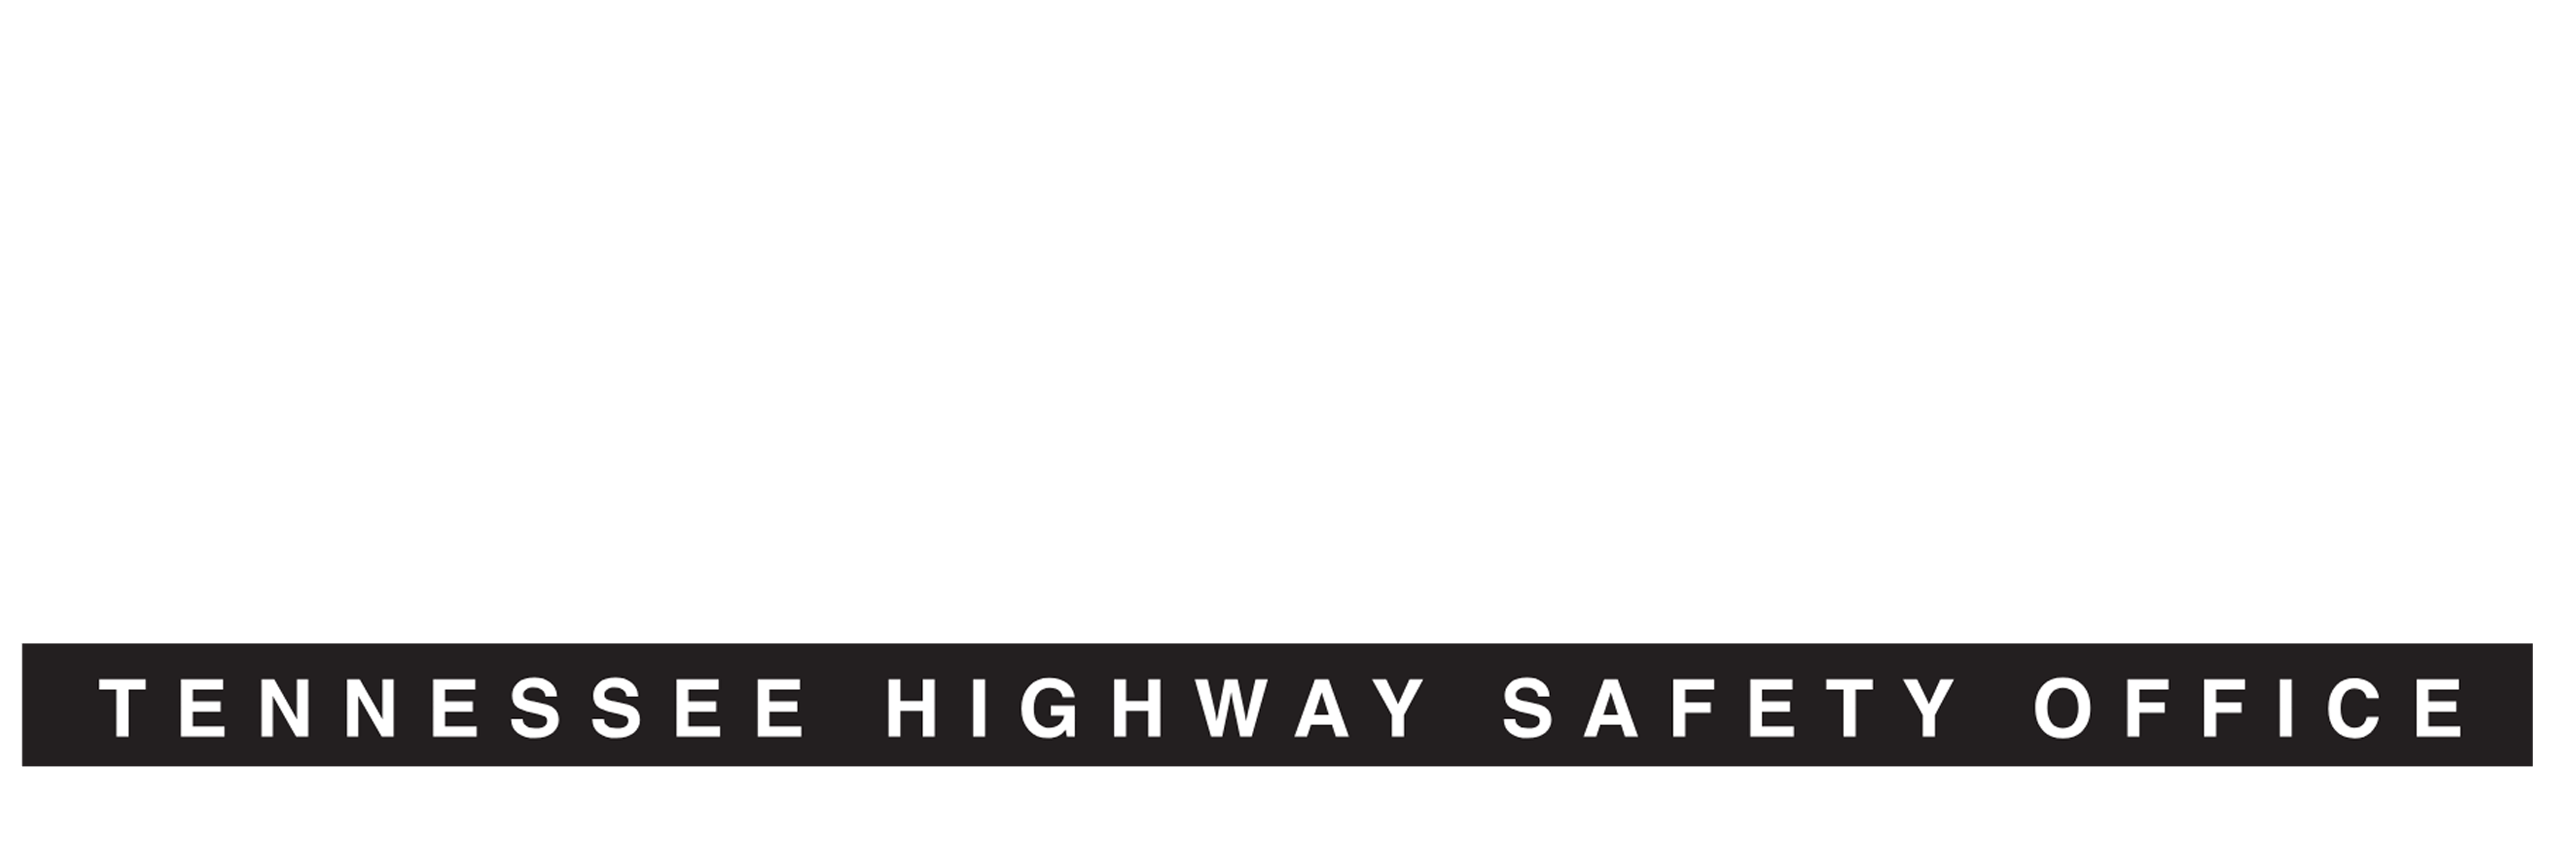 Tennessee Highway Safety Office - Fans Don't Let Fans